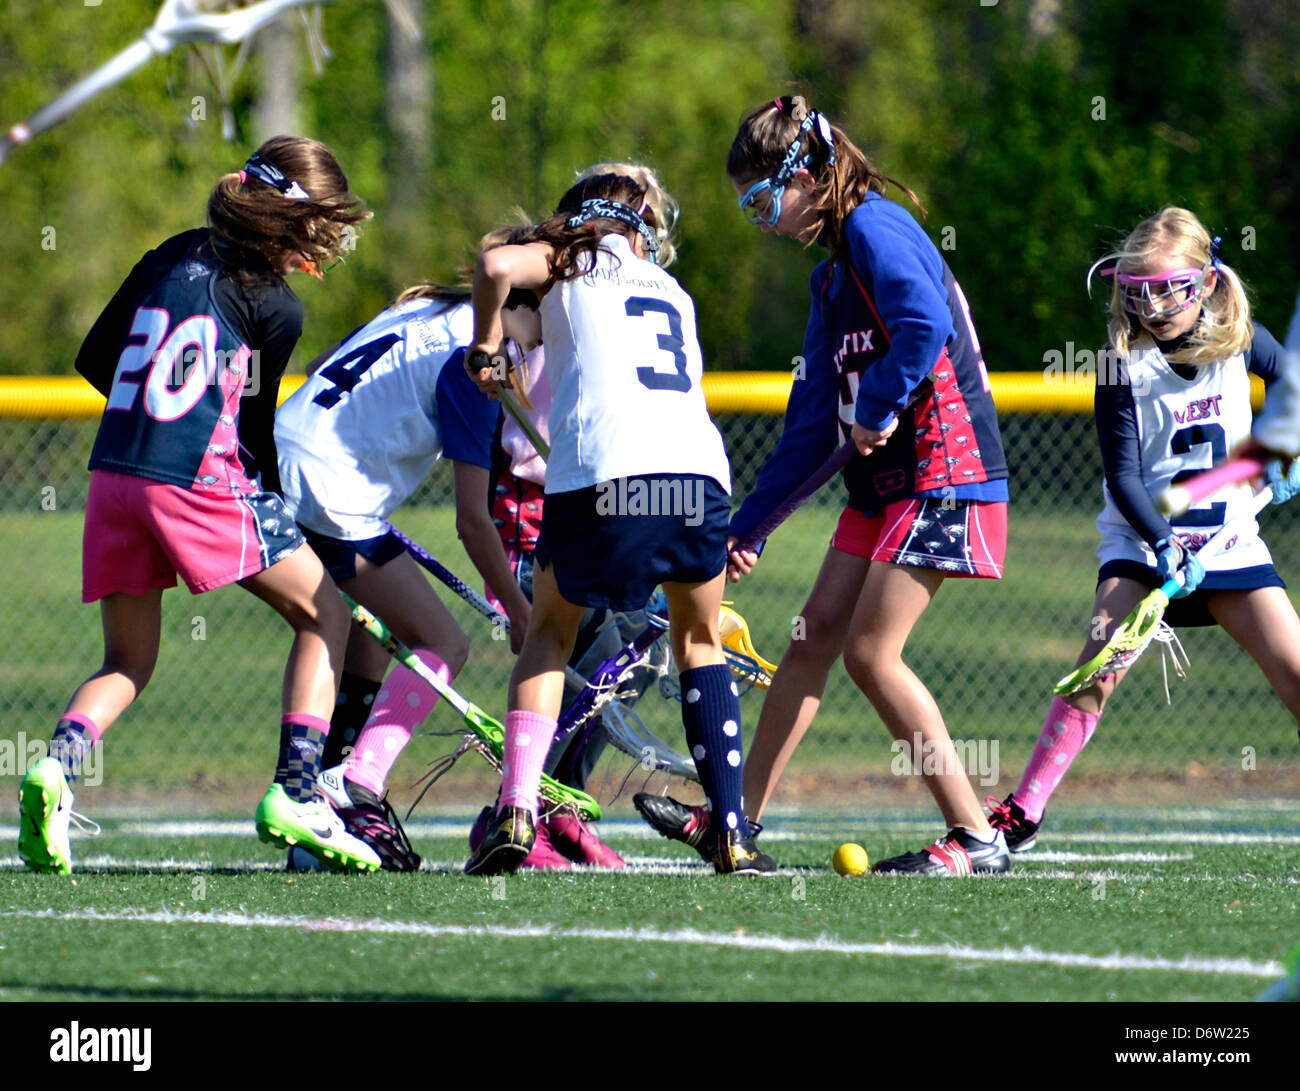 Two teams of young girls fighting for the ball during a lacrosse game. Stock Photo